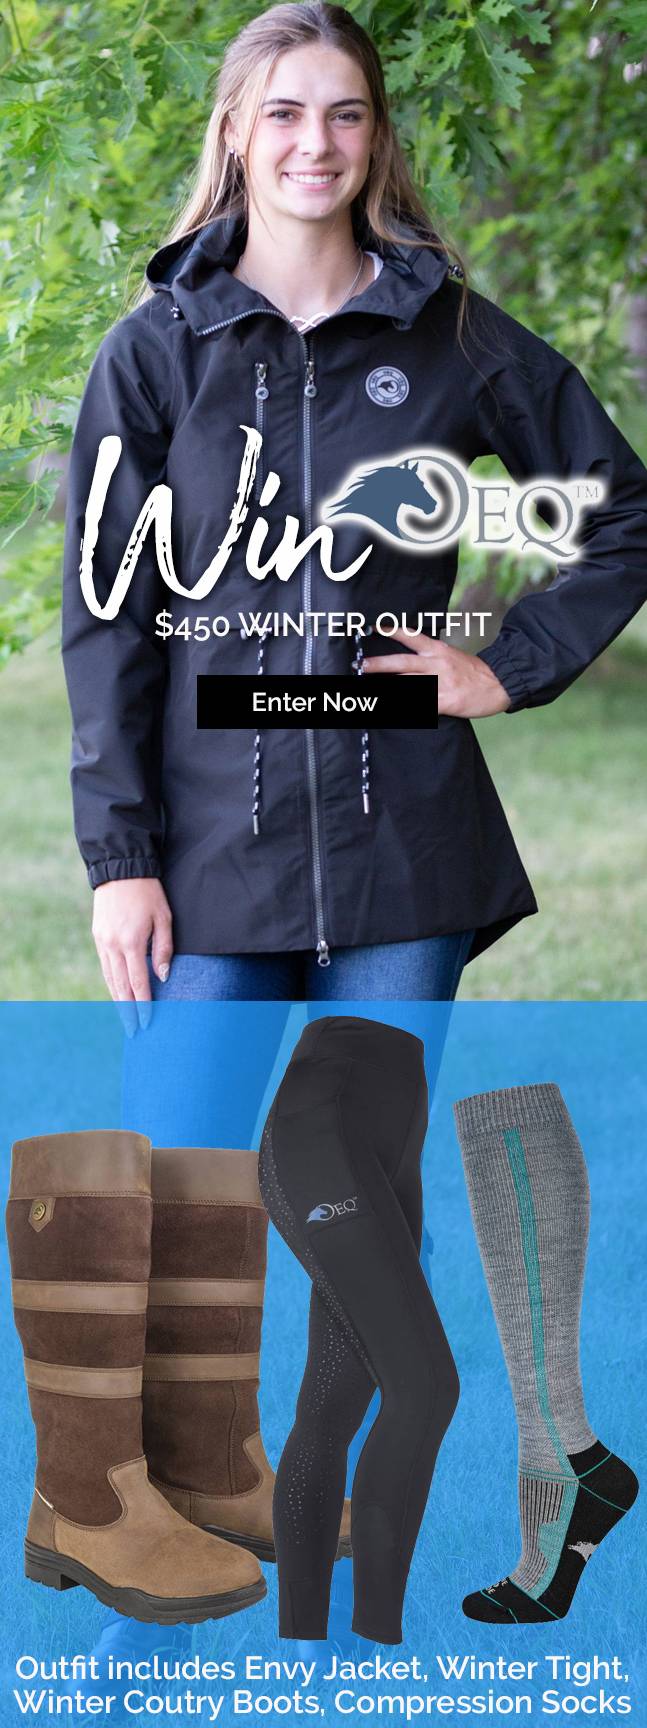 Oak Equestrian OEQ Winter Outfit Valued at $450.00